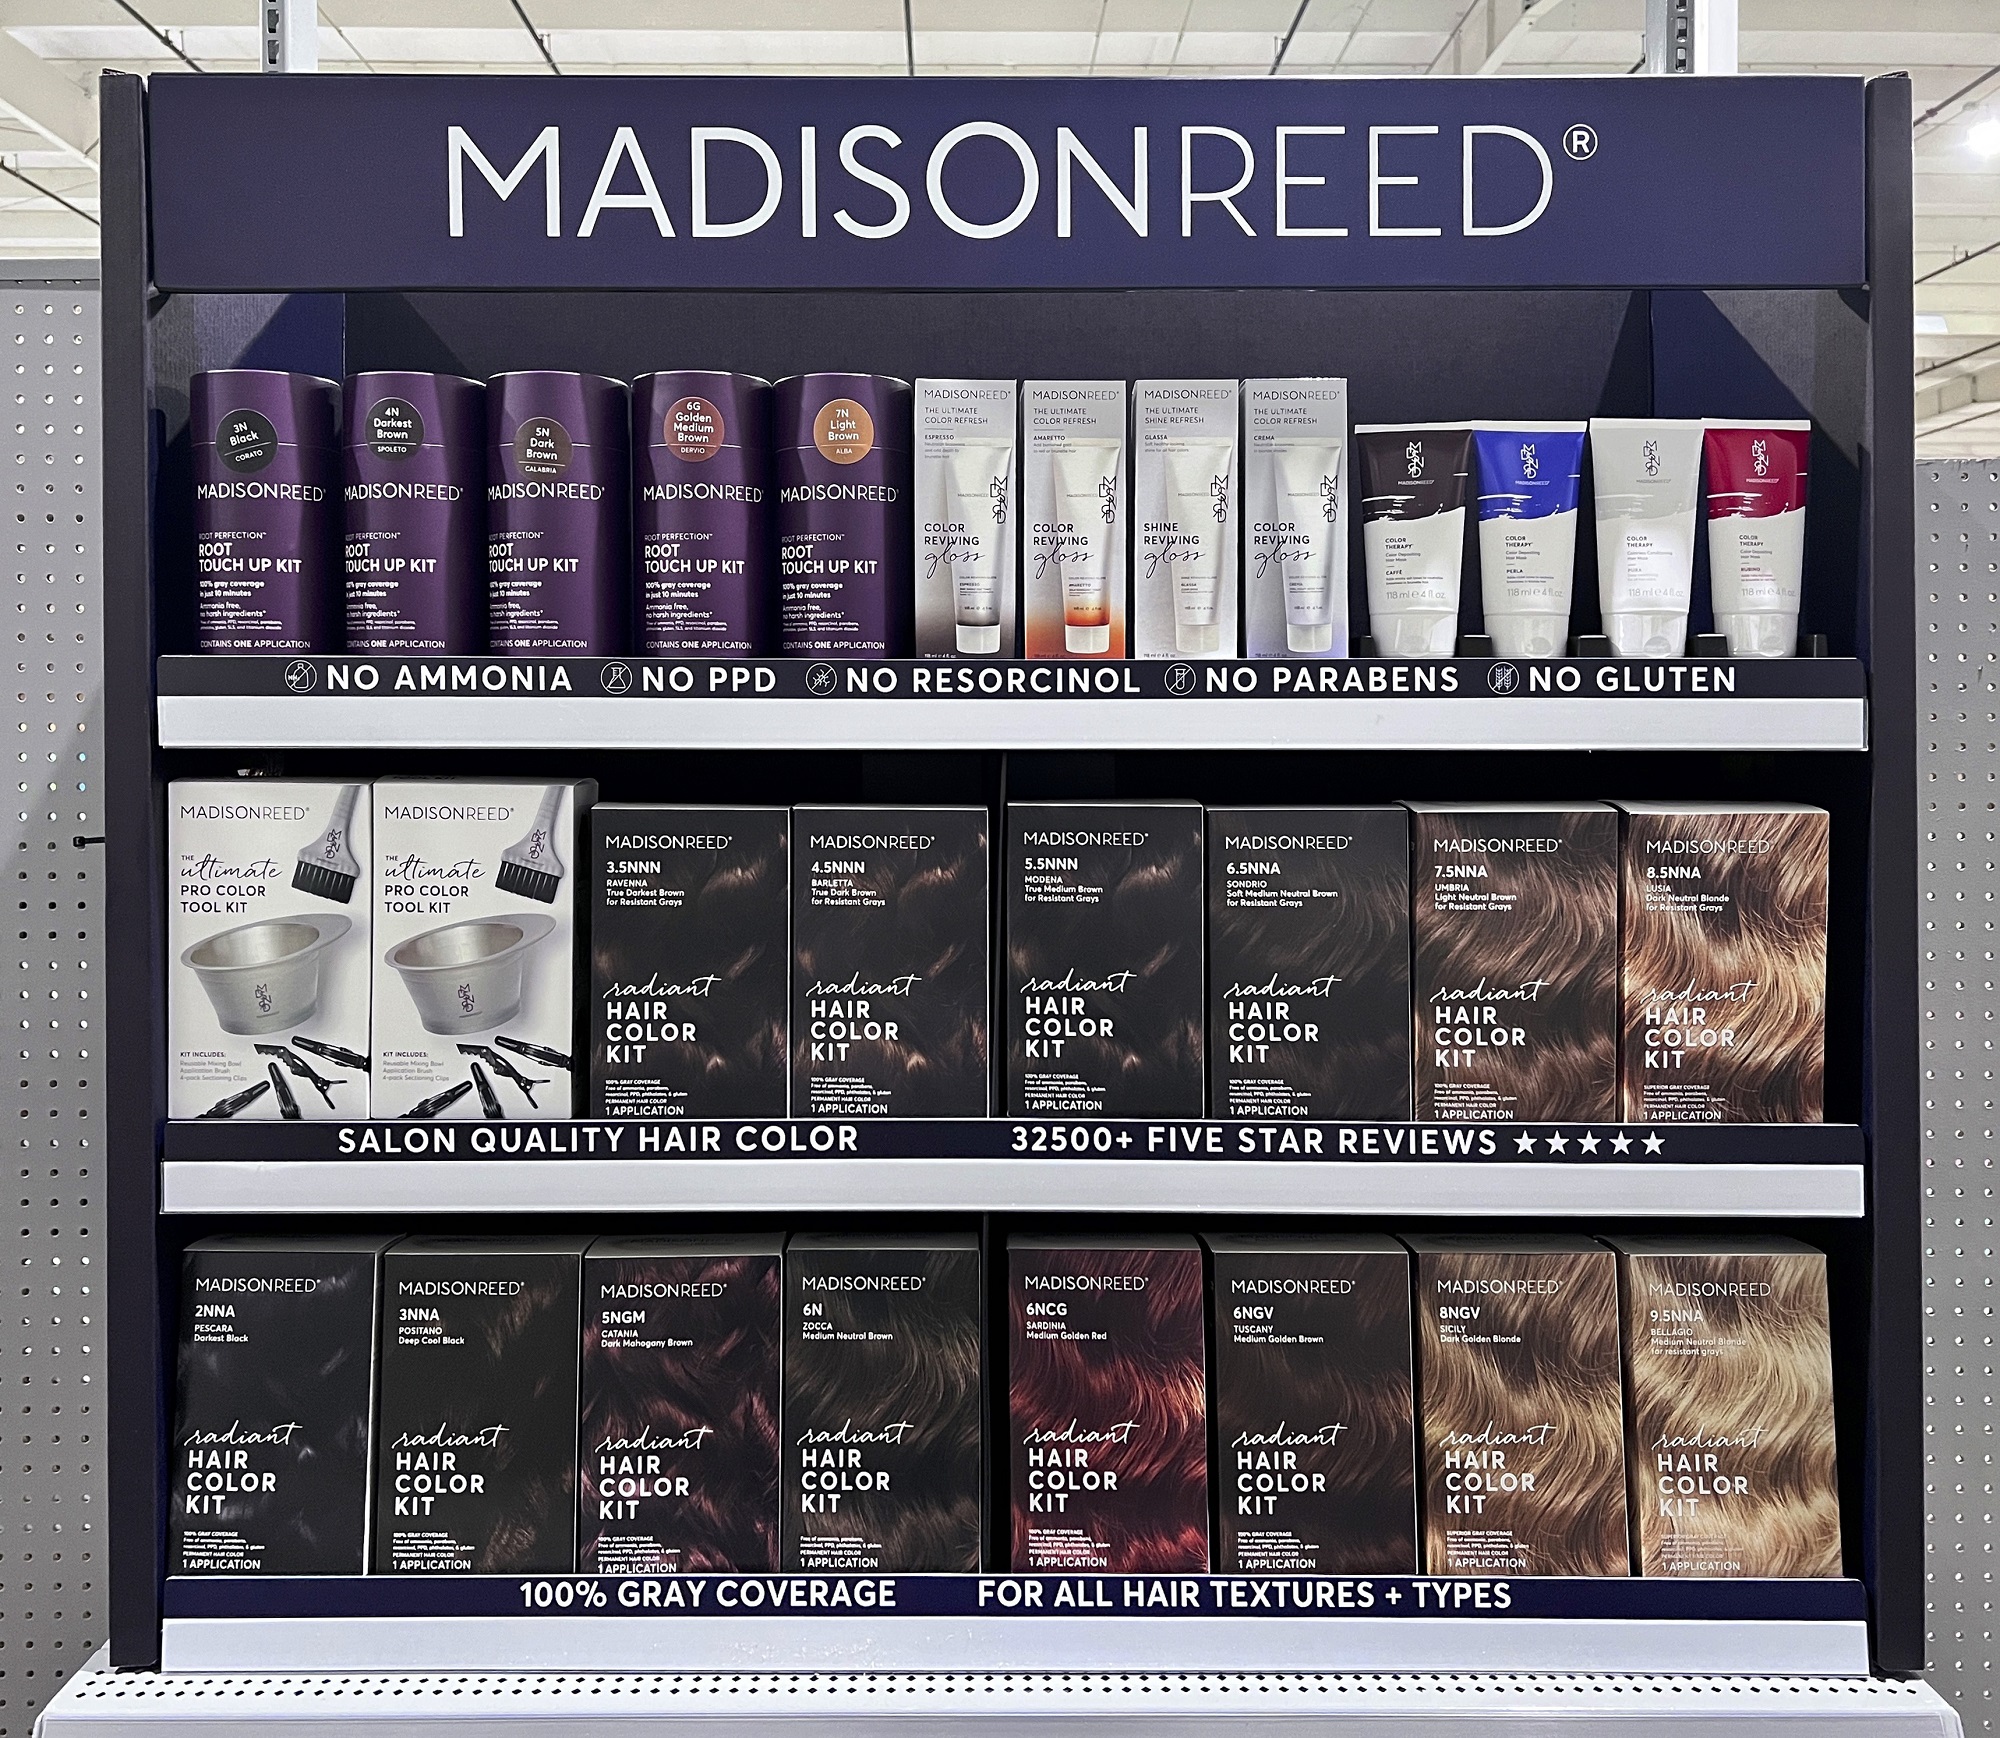 Prestige beauty brand Madison Reed launches into Walmart stores